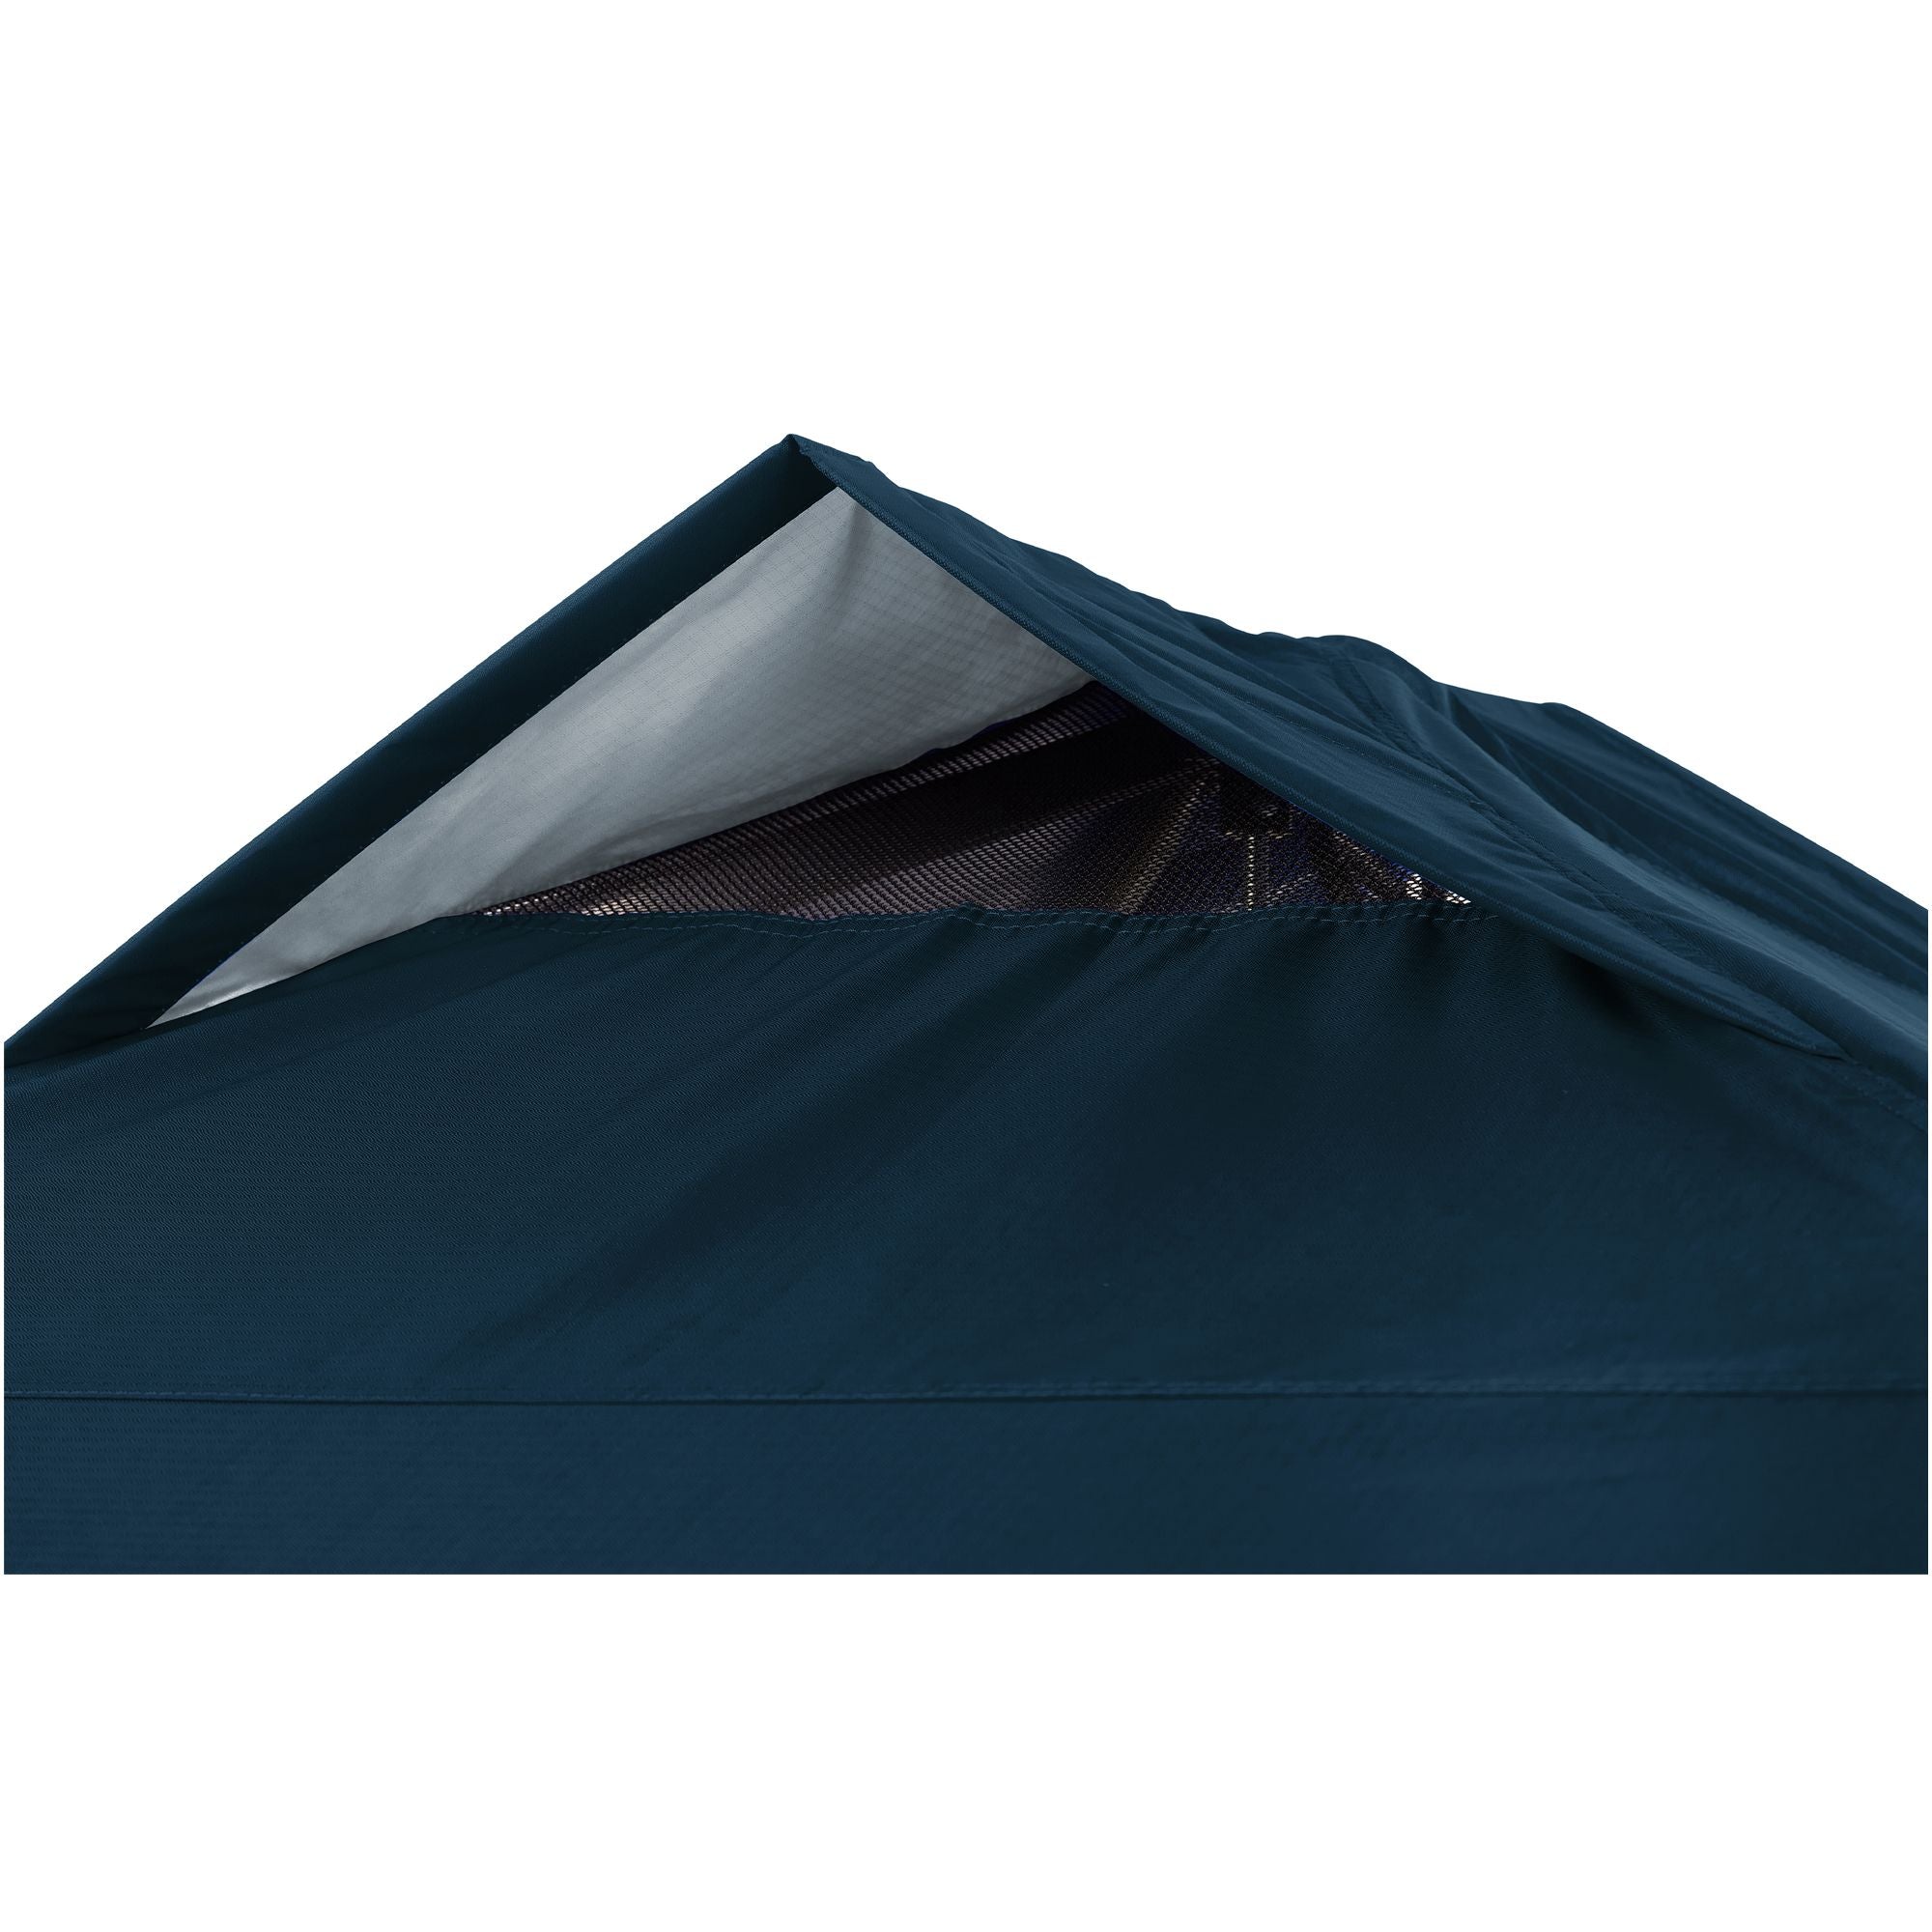 LevrUp Canopy, Navy, Air Vent